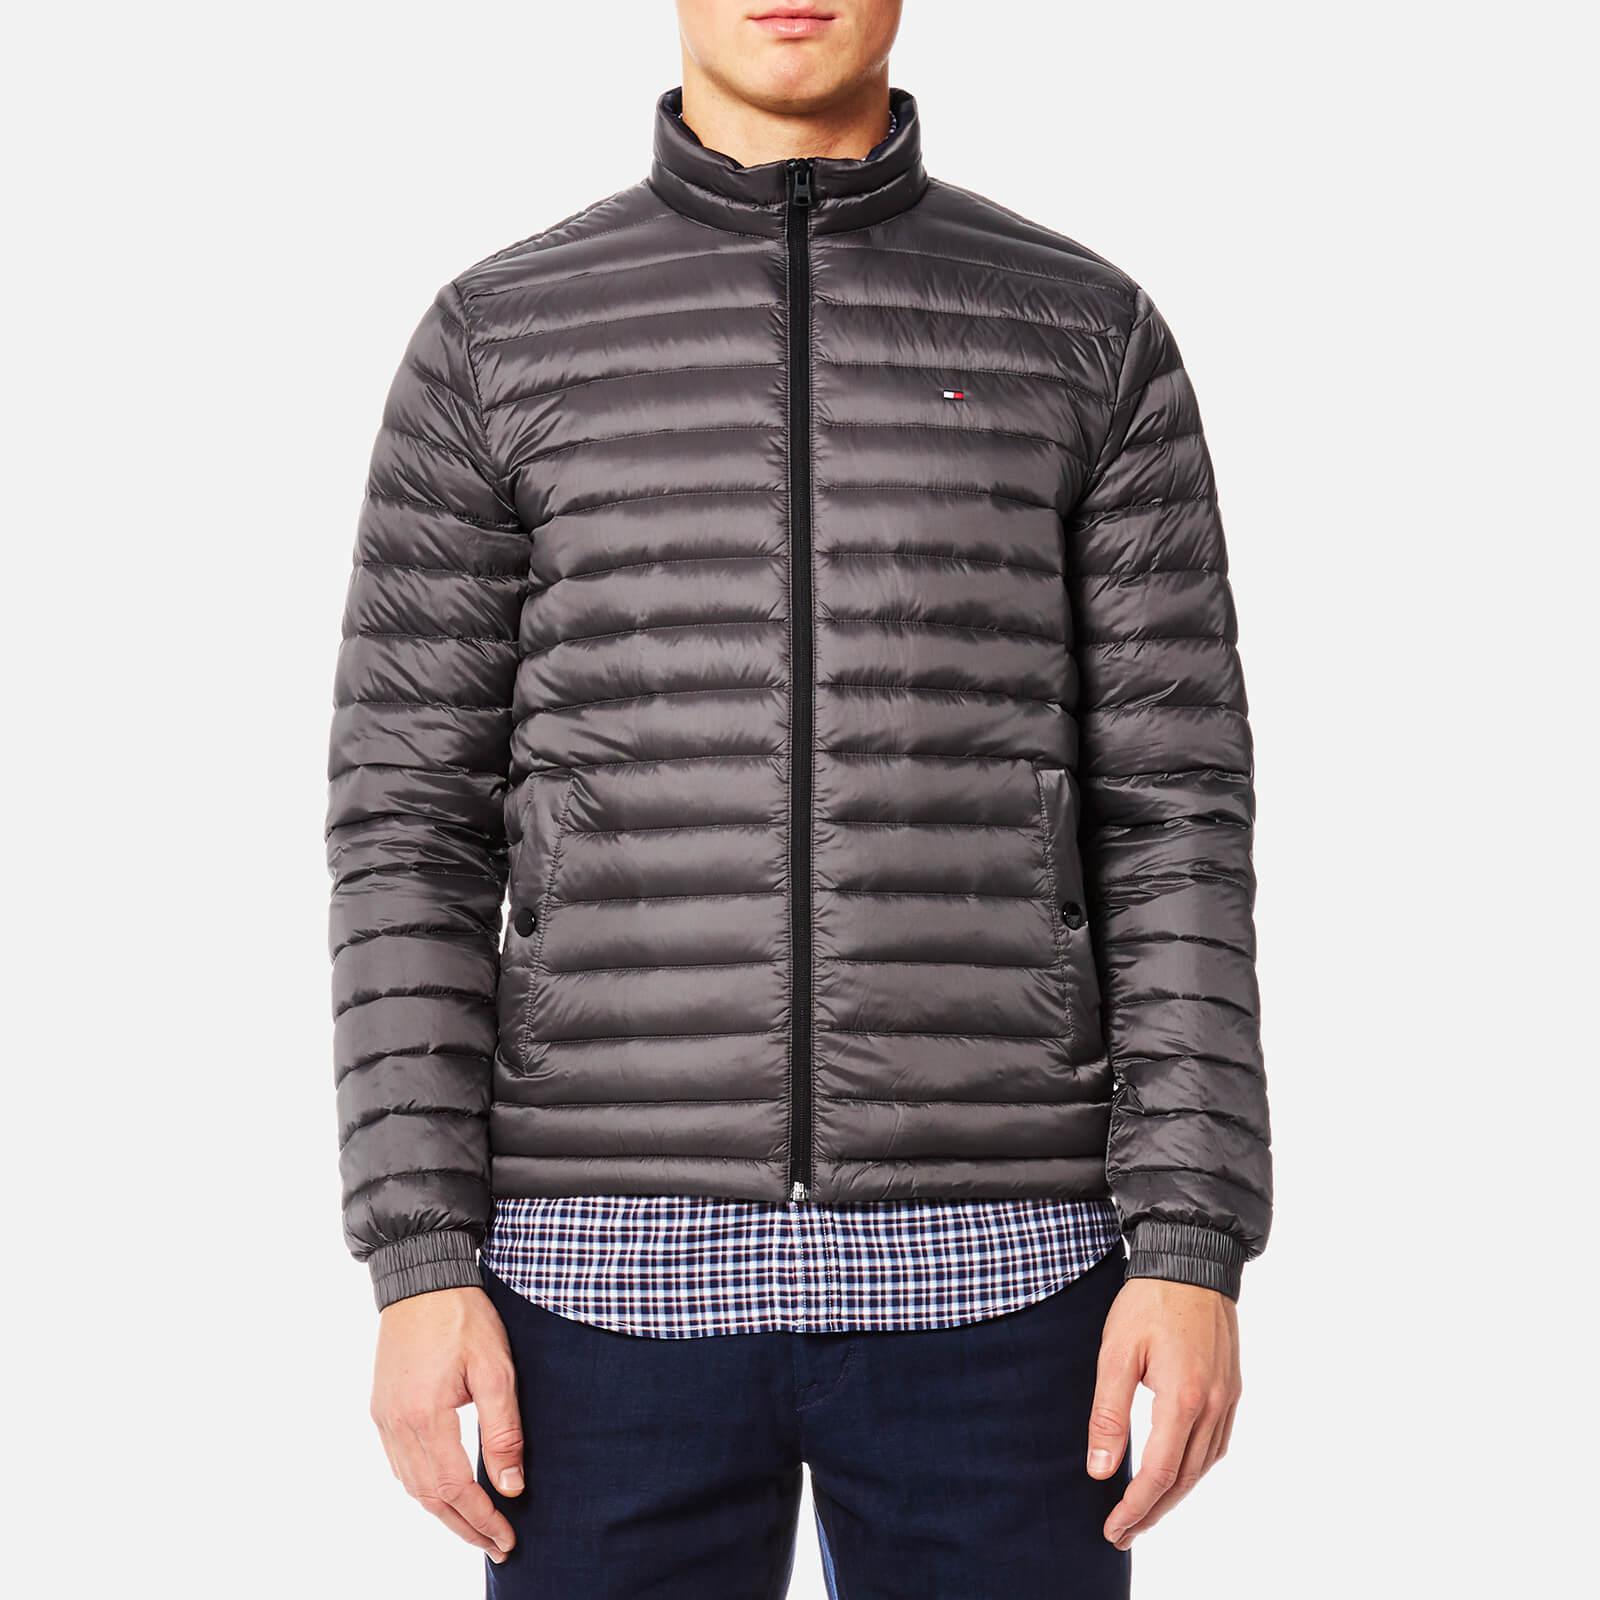 Lyst - Tommy Hilfiger Lightweight Packable Down Bomber Jacket in Gray ...